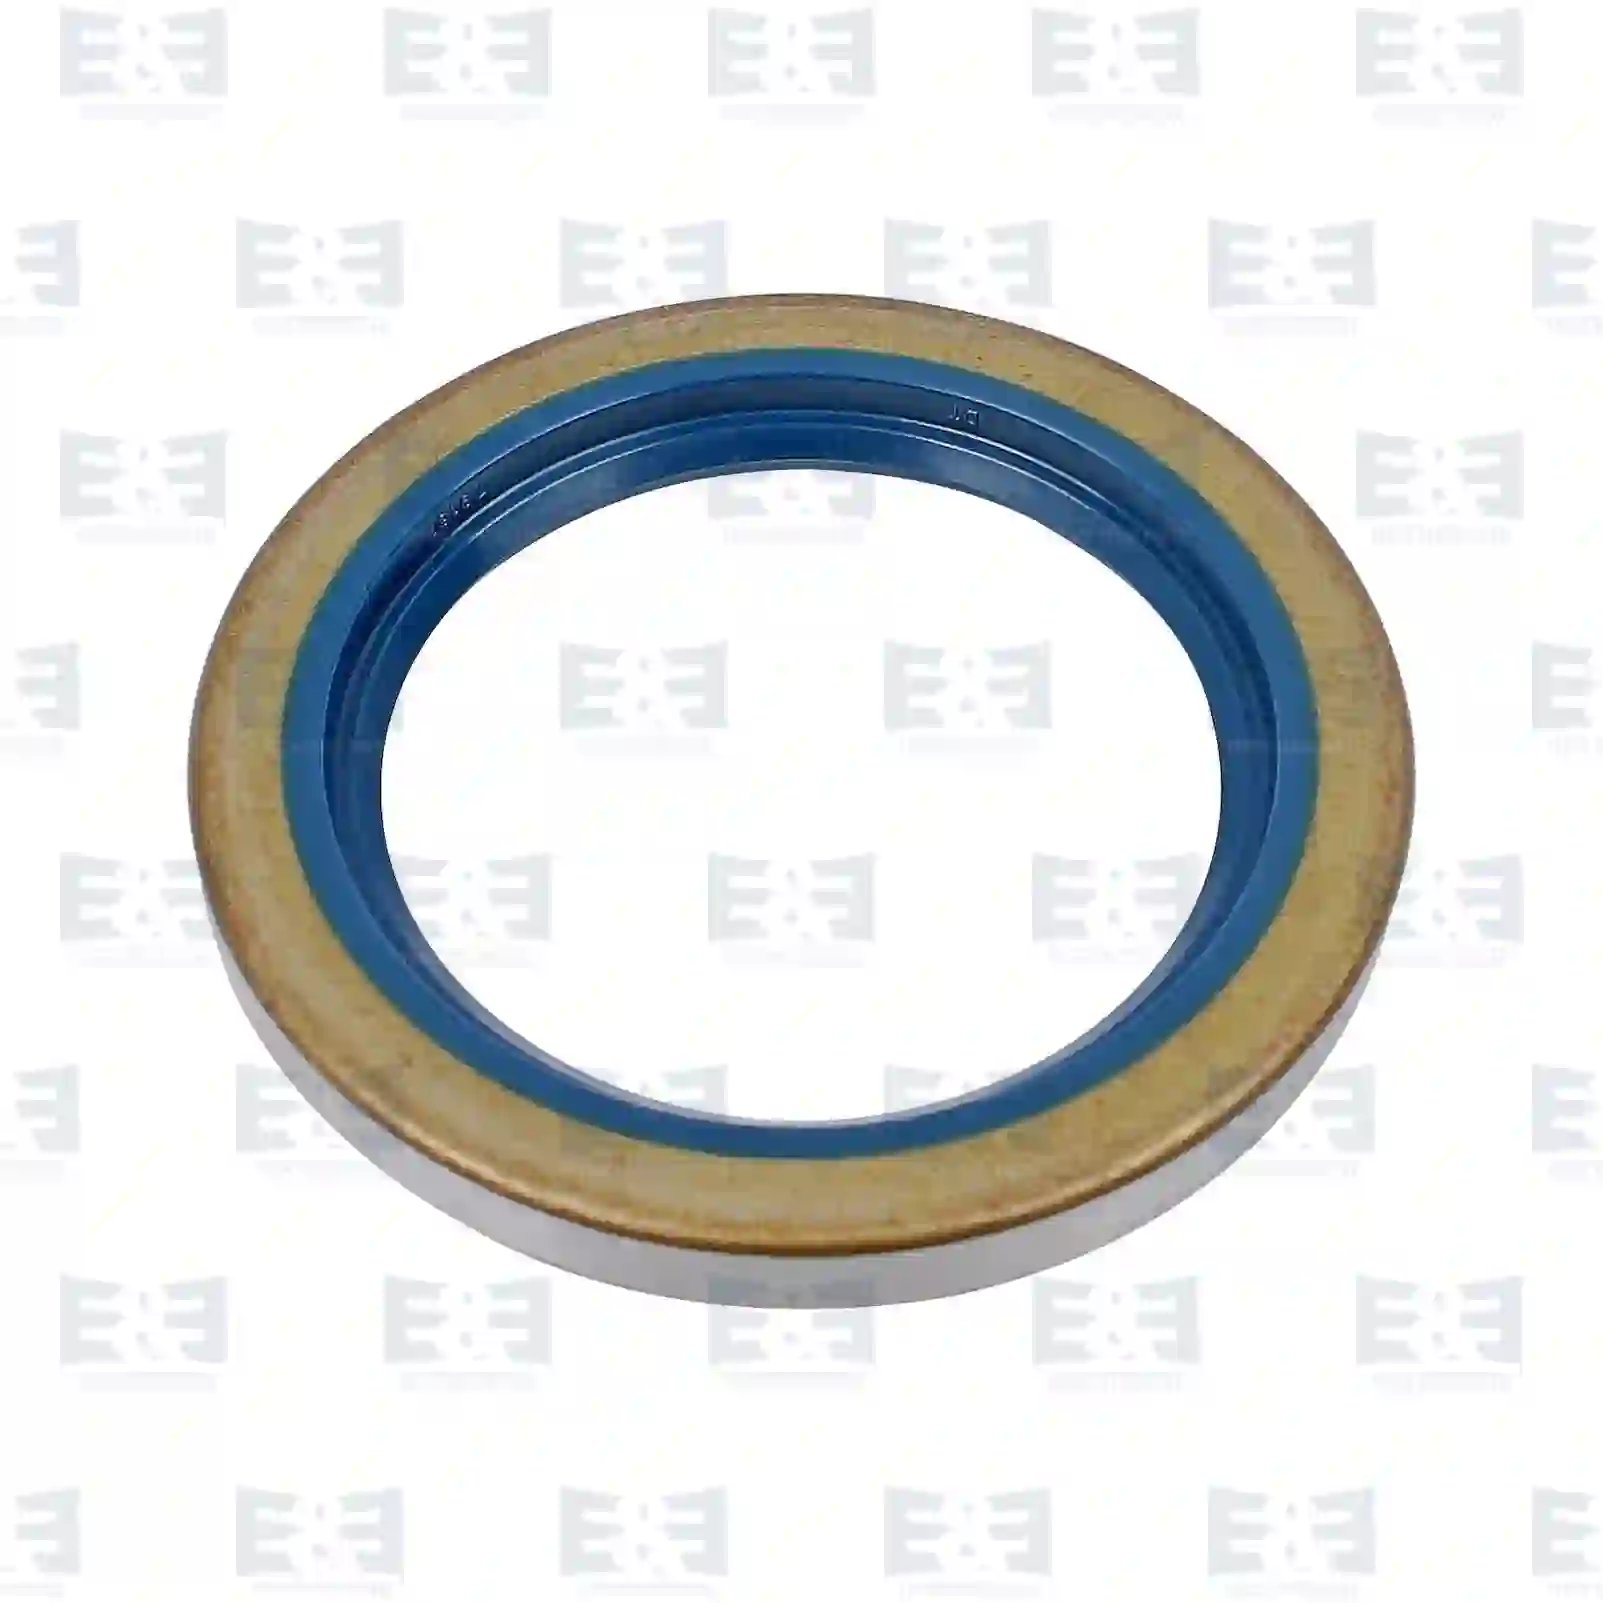 Steering Knuckle Oil seal, EE No 2E2270513 ,  oem no:06562790029, 87661602882, 0069979046, 0089979746, 3579970146, 5000281091, ZG02719-0008 E&E Truck Spare Parts | Truck Spare Parts, Auotomotive Spare Parts